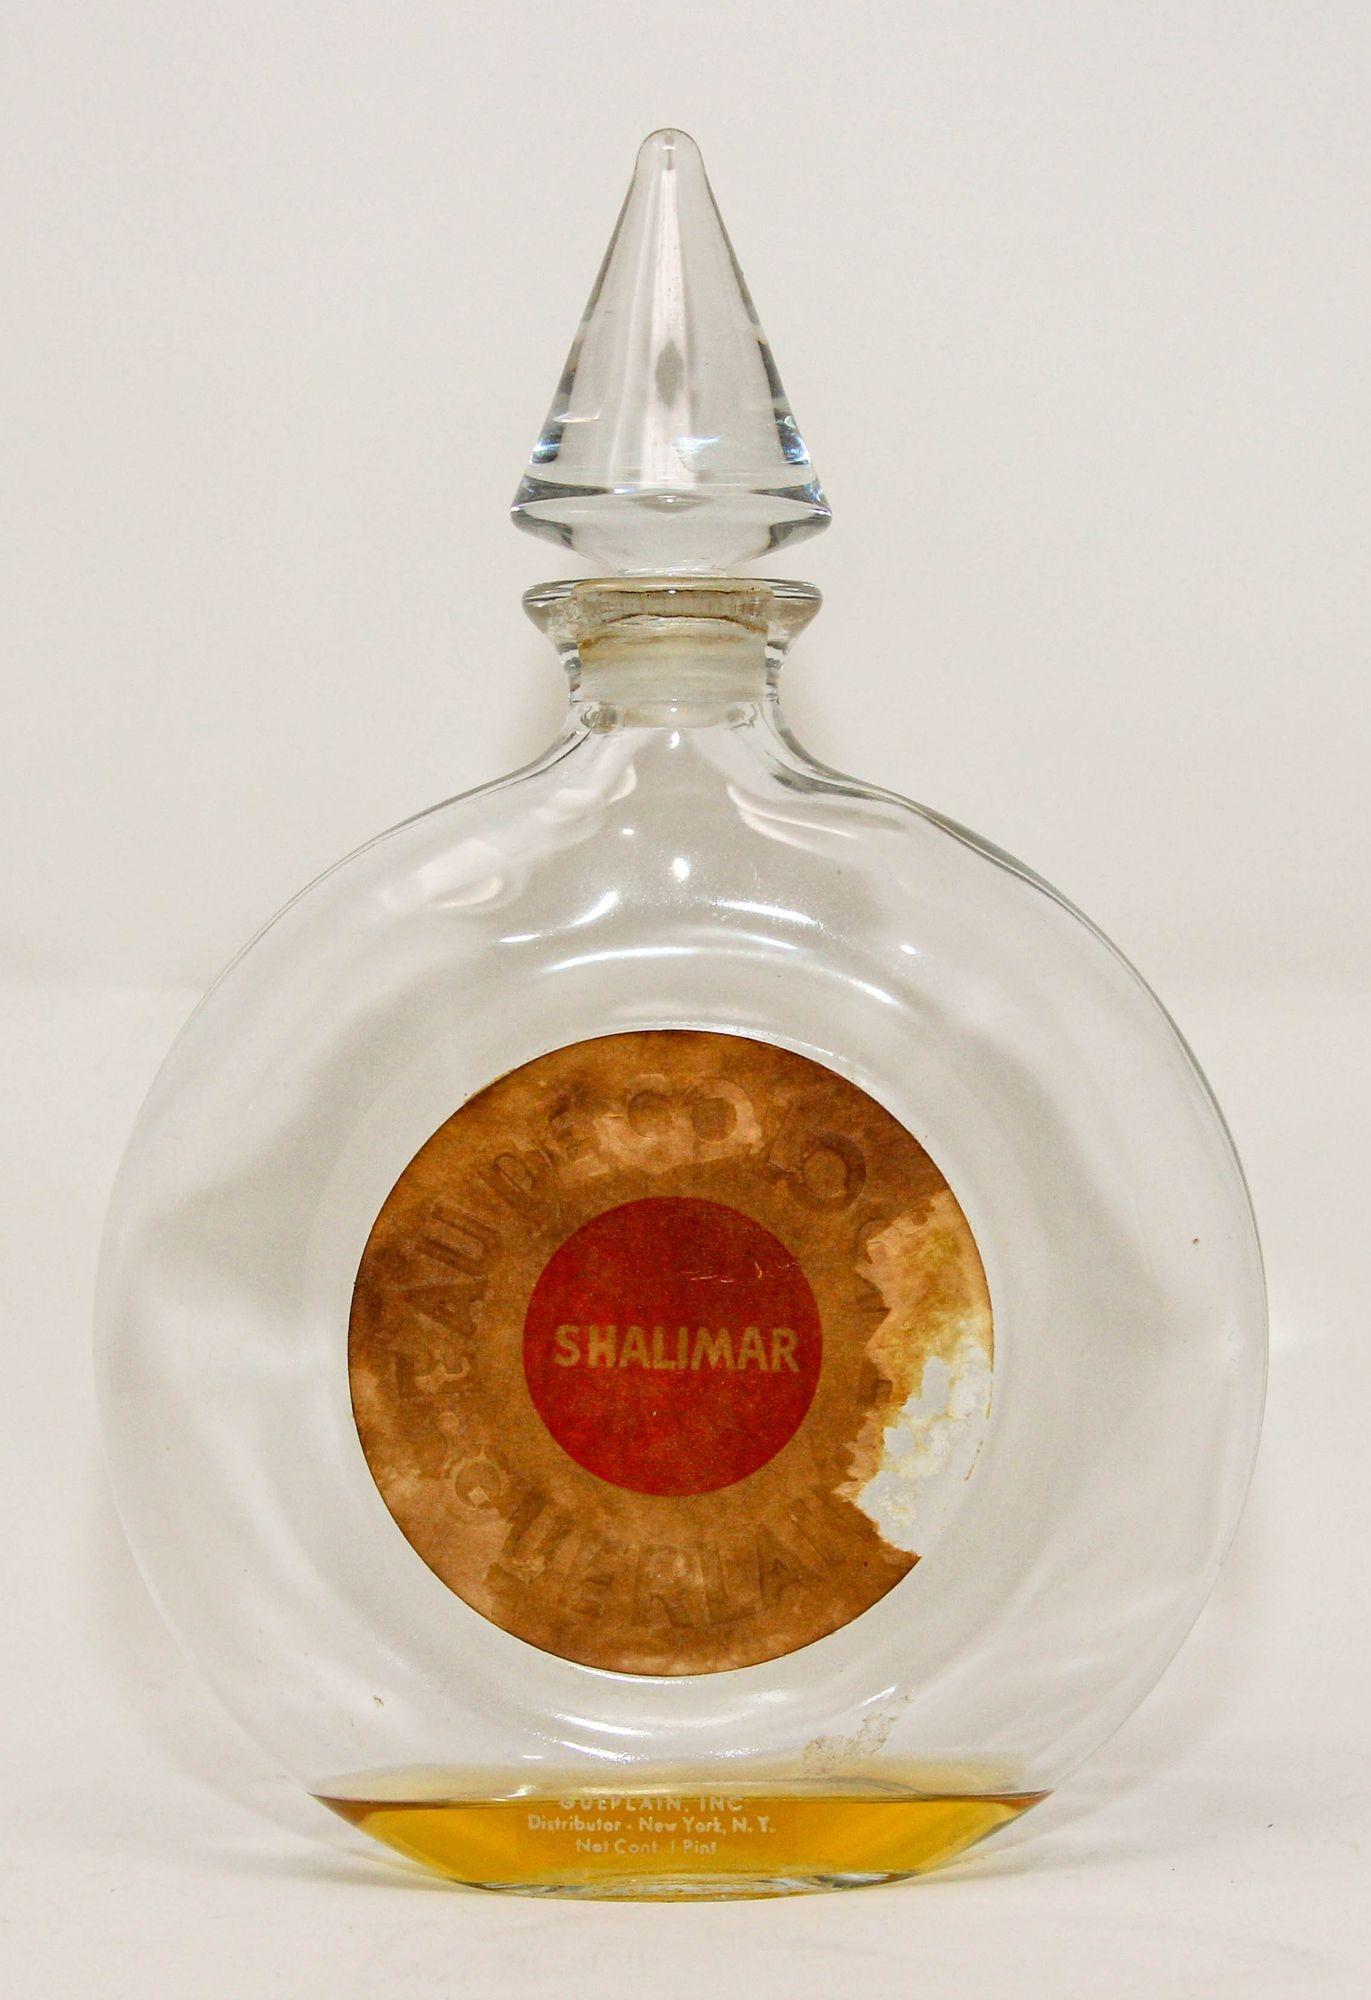 Large vintage collectible Guerlain Shalimar eau de cologne glass perfume bottle.
Empty collectible glass bottle of the famous Shalimar perfume.
Inspired by the passionate love story between an emperor and an Indian princess, Shalimar, which means